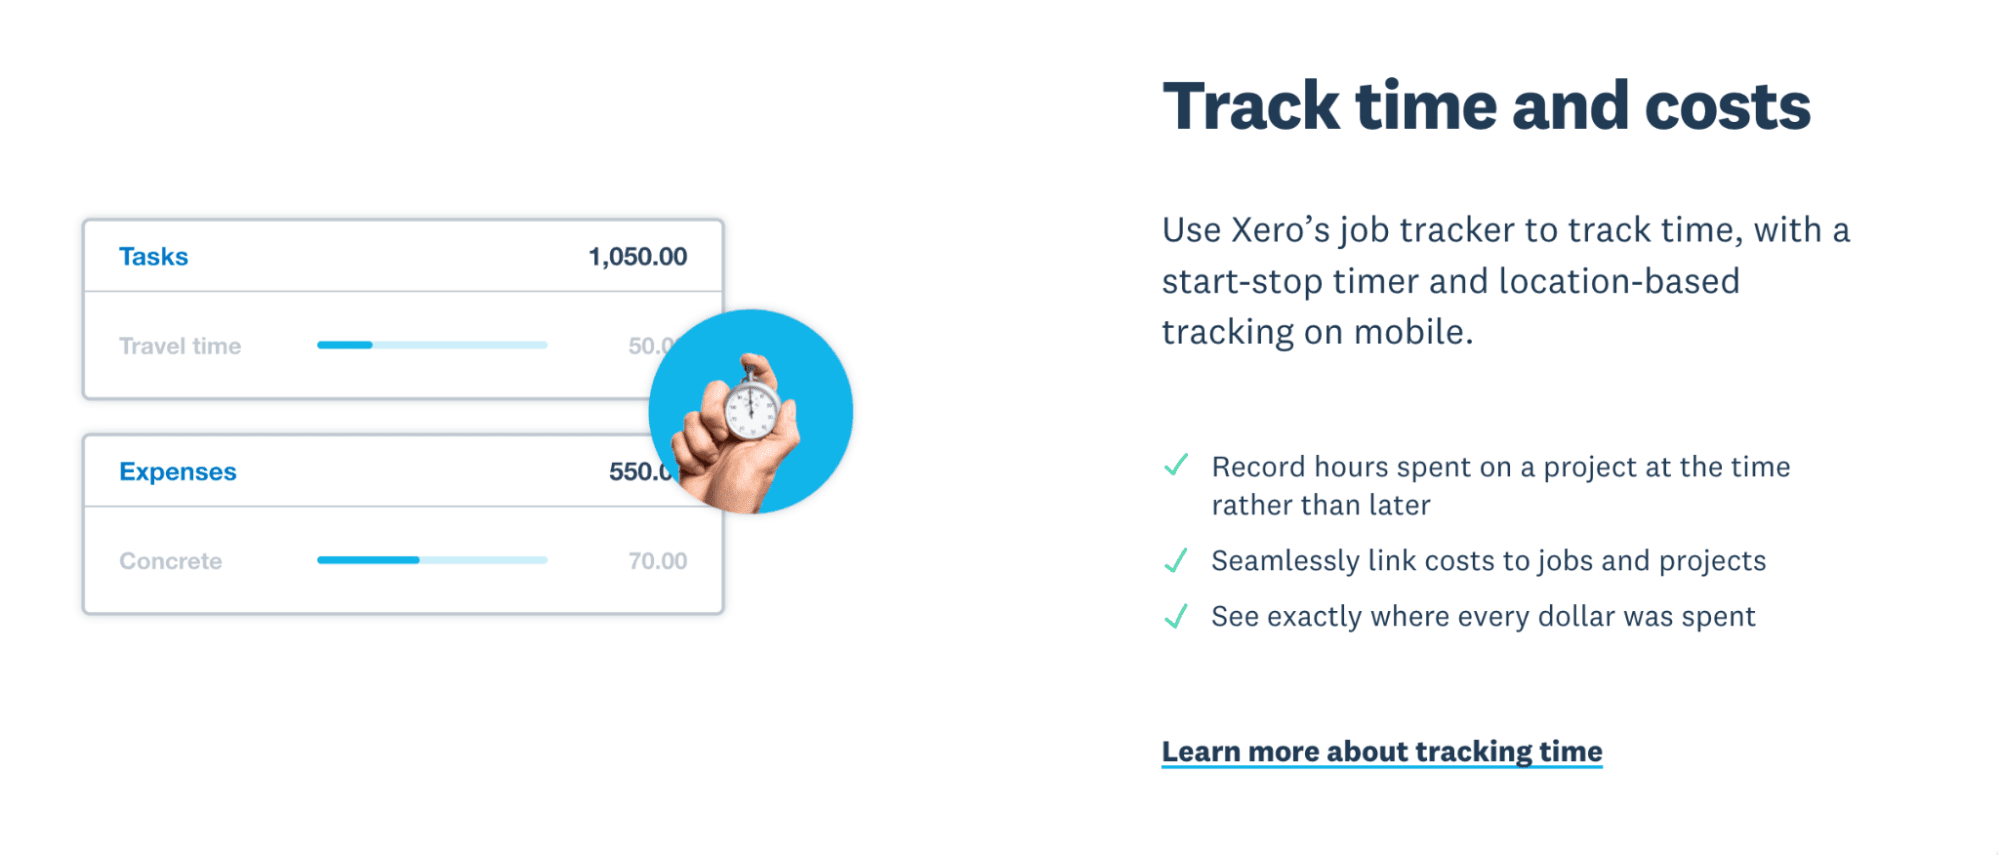 Details on Xero's time tracking